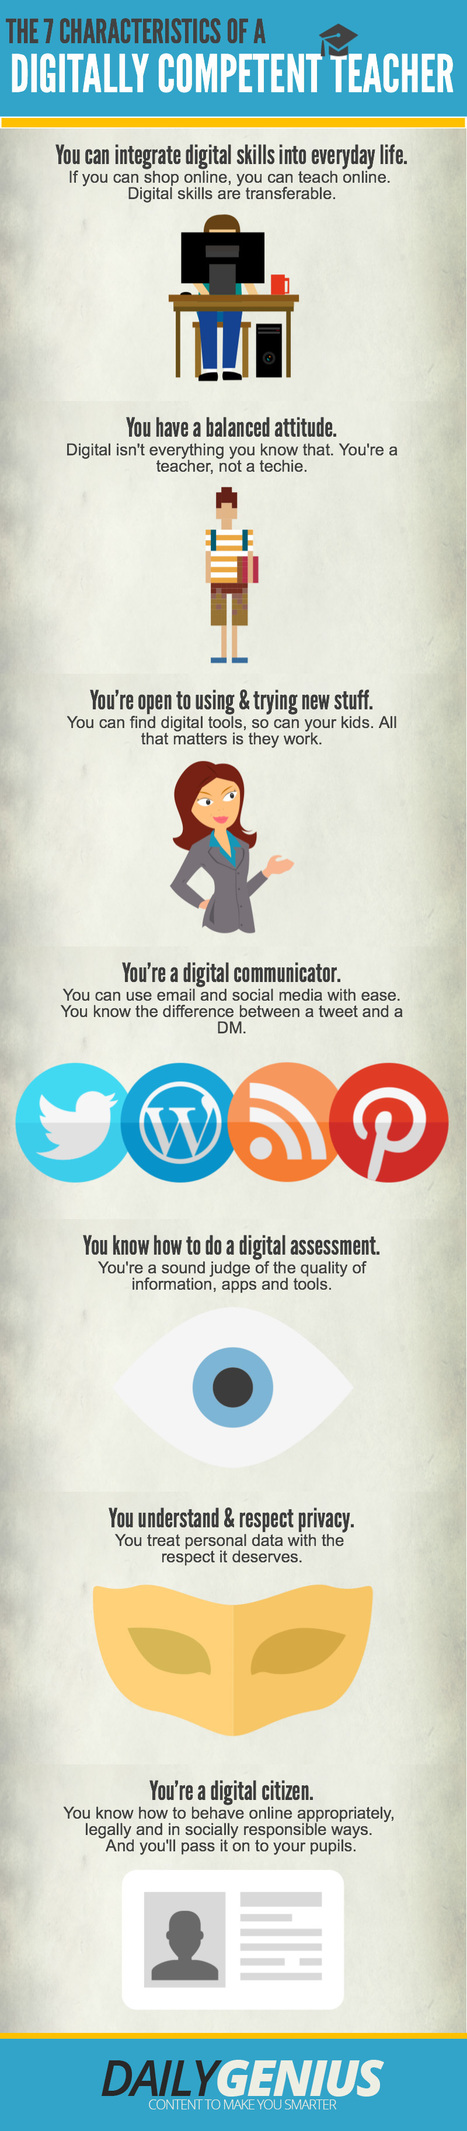 The Characteristics of a Digitally Competent Teacher (Infographic) by GDC | E-Learning-Inclusivo (Mashup) | Scoop.it